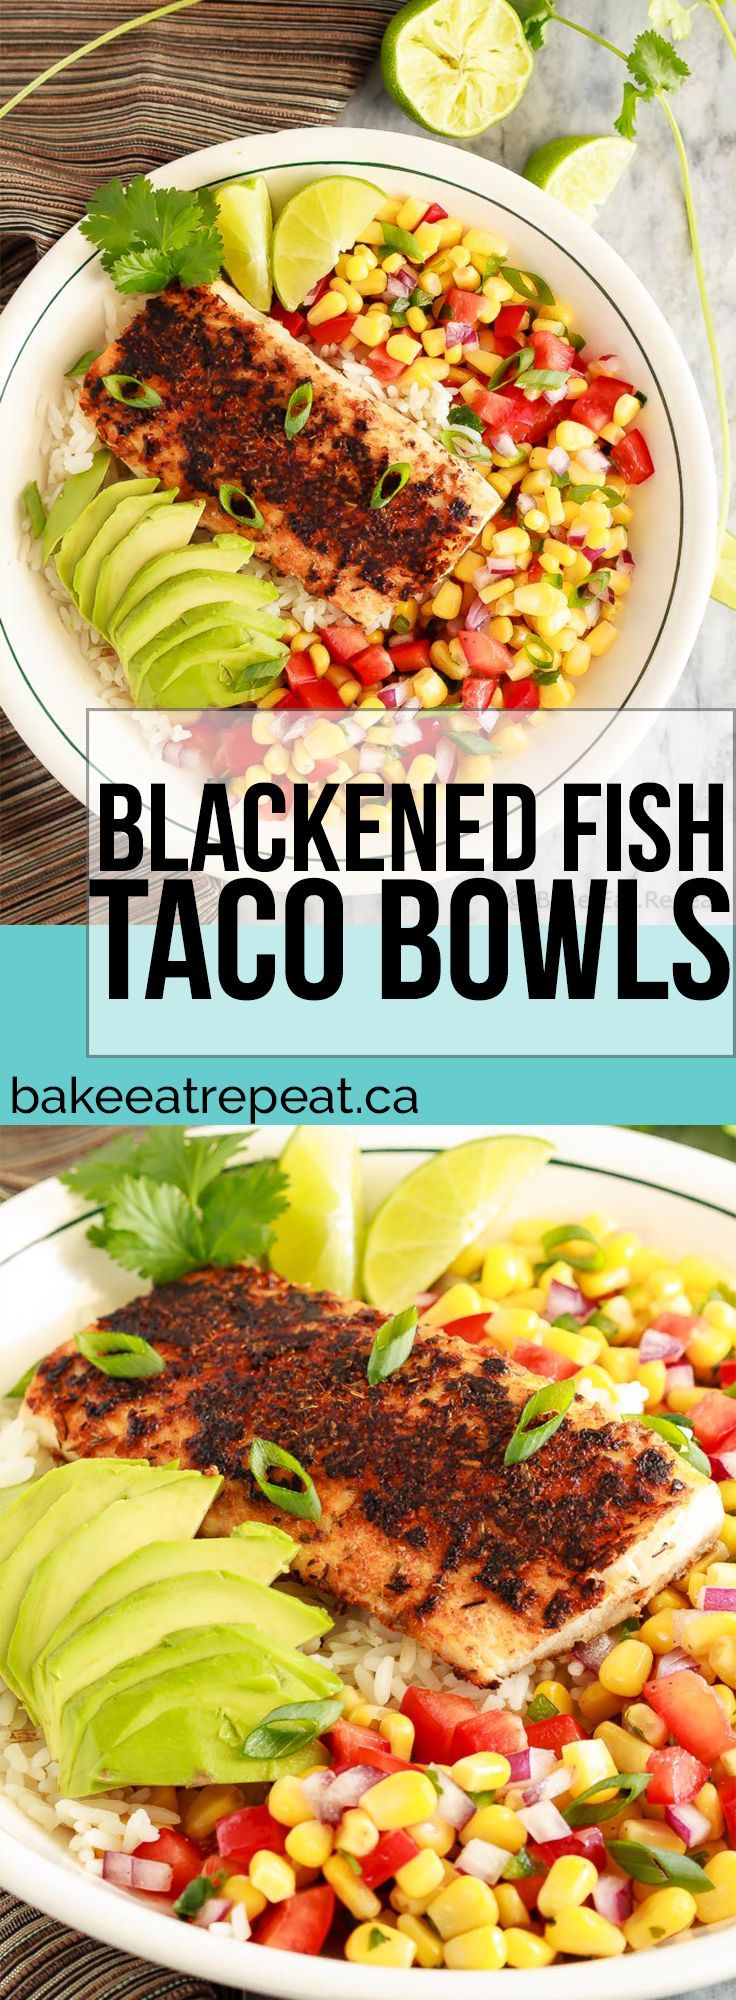 These blackened fish taco bowls with corn salsa are quickly becoming a family favourite! Spicy fish, fresh avocado, and corn salsa